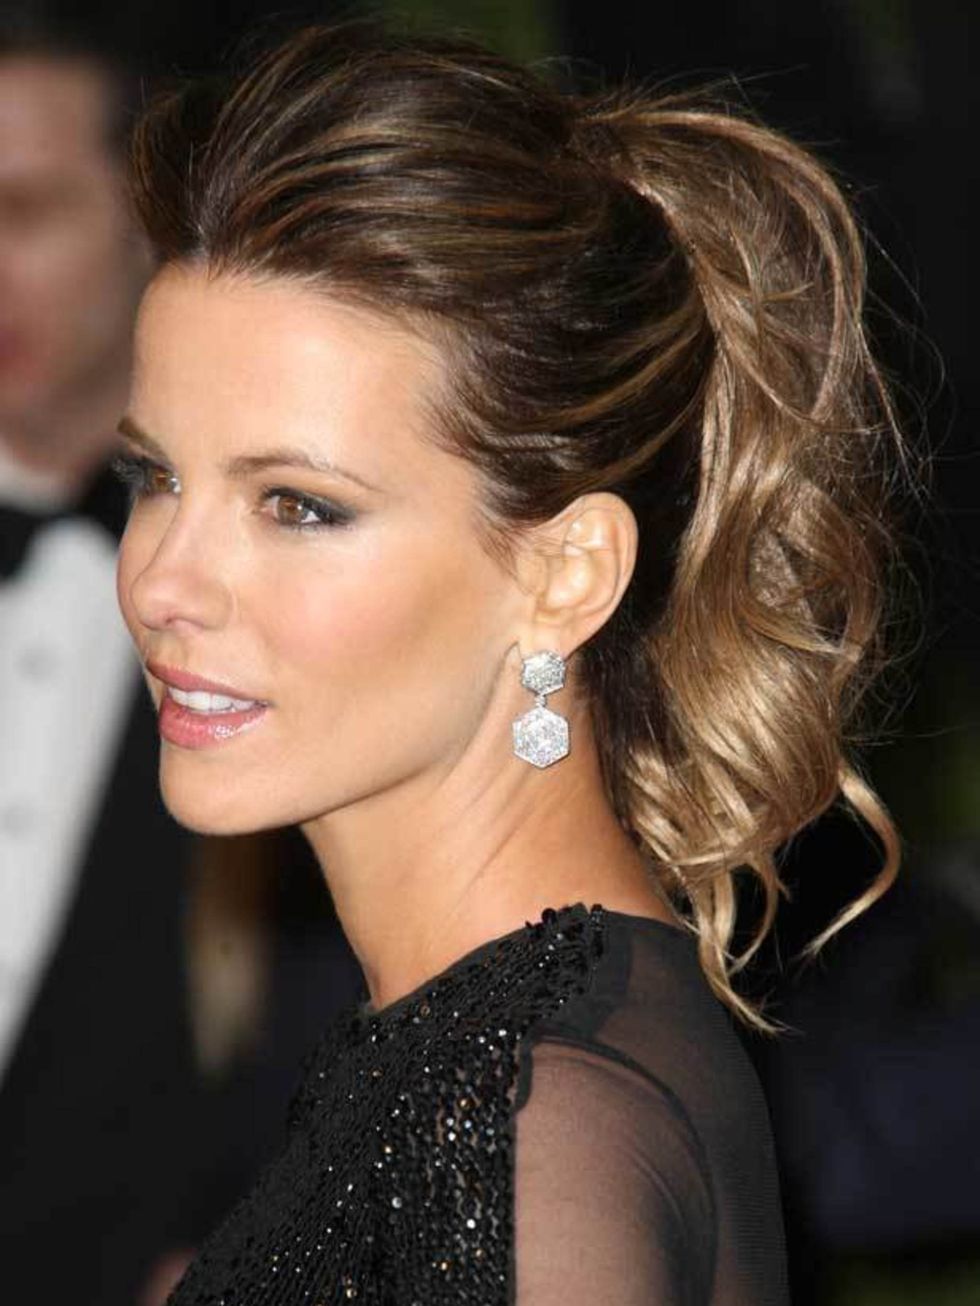 <p><a href="http://www.elleuk.com/starstyle/red-carpet/%28section%29/oscars-2011">Kate Beckinsale at the 2011 Oscars</a></p>